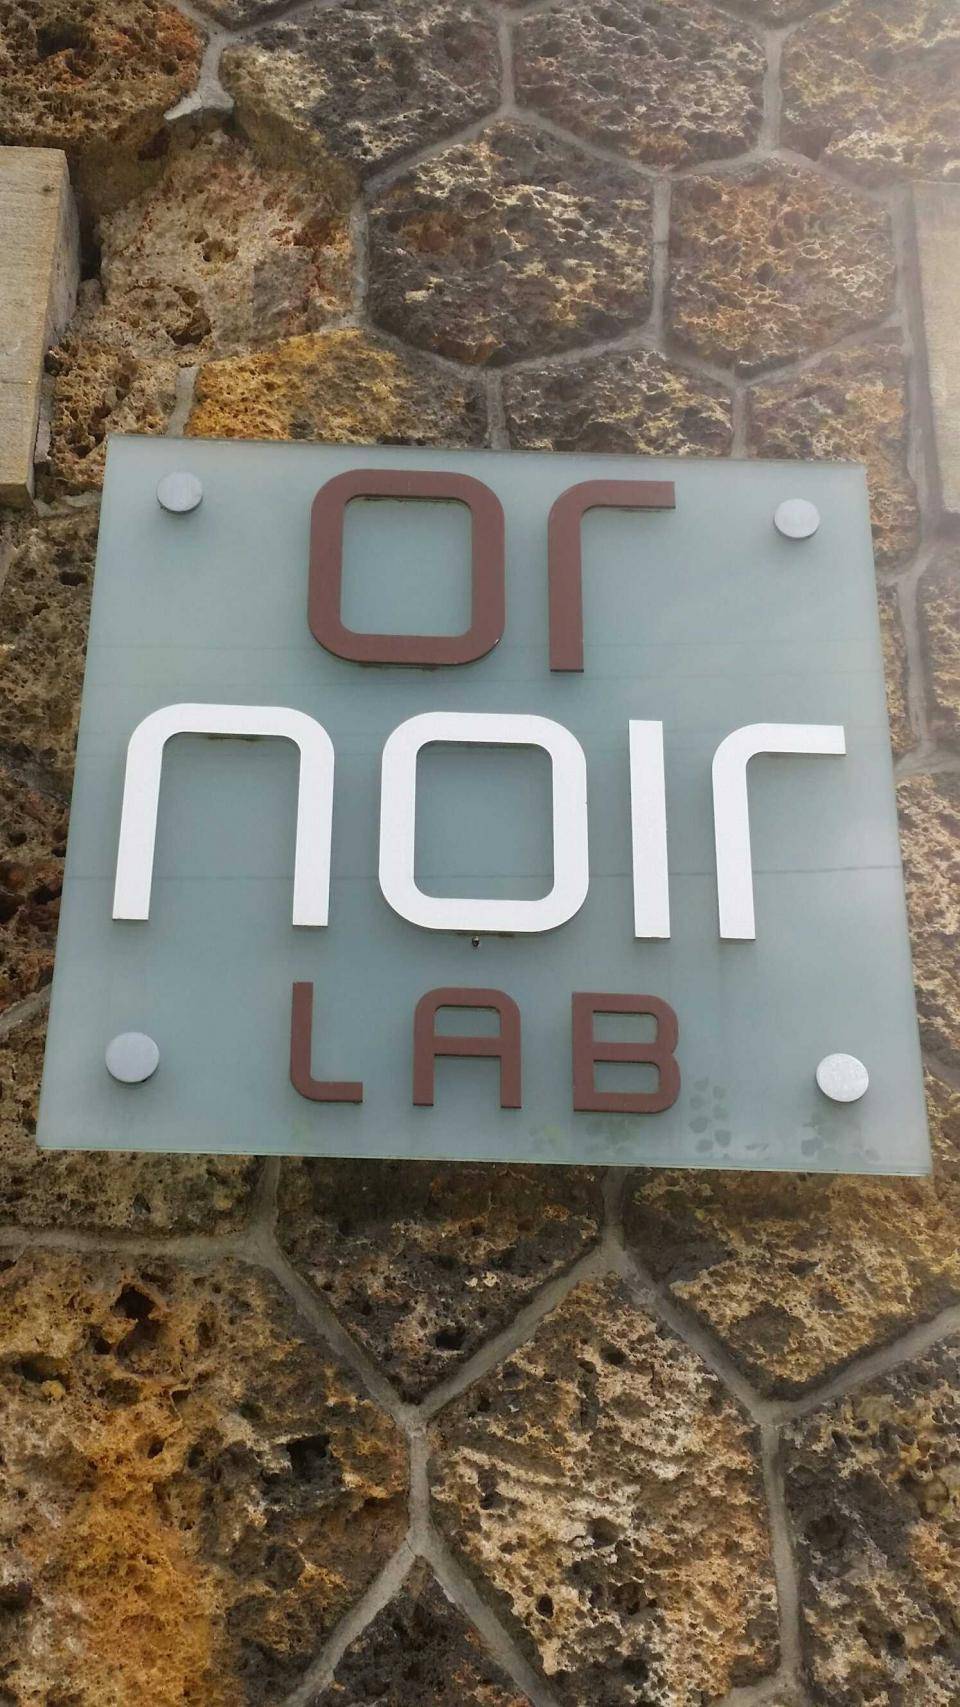 Entrance to the Or Noir Lab. 